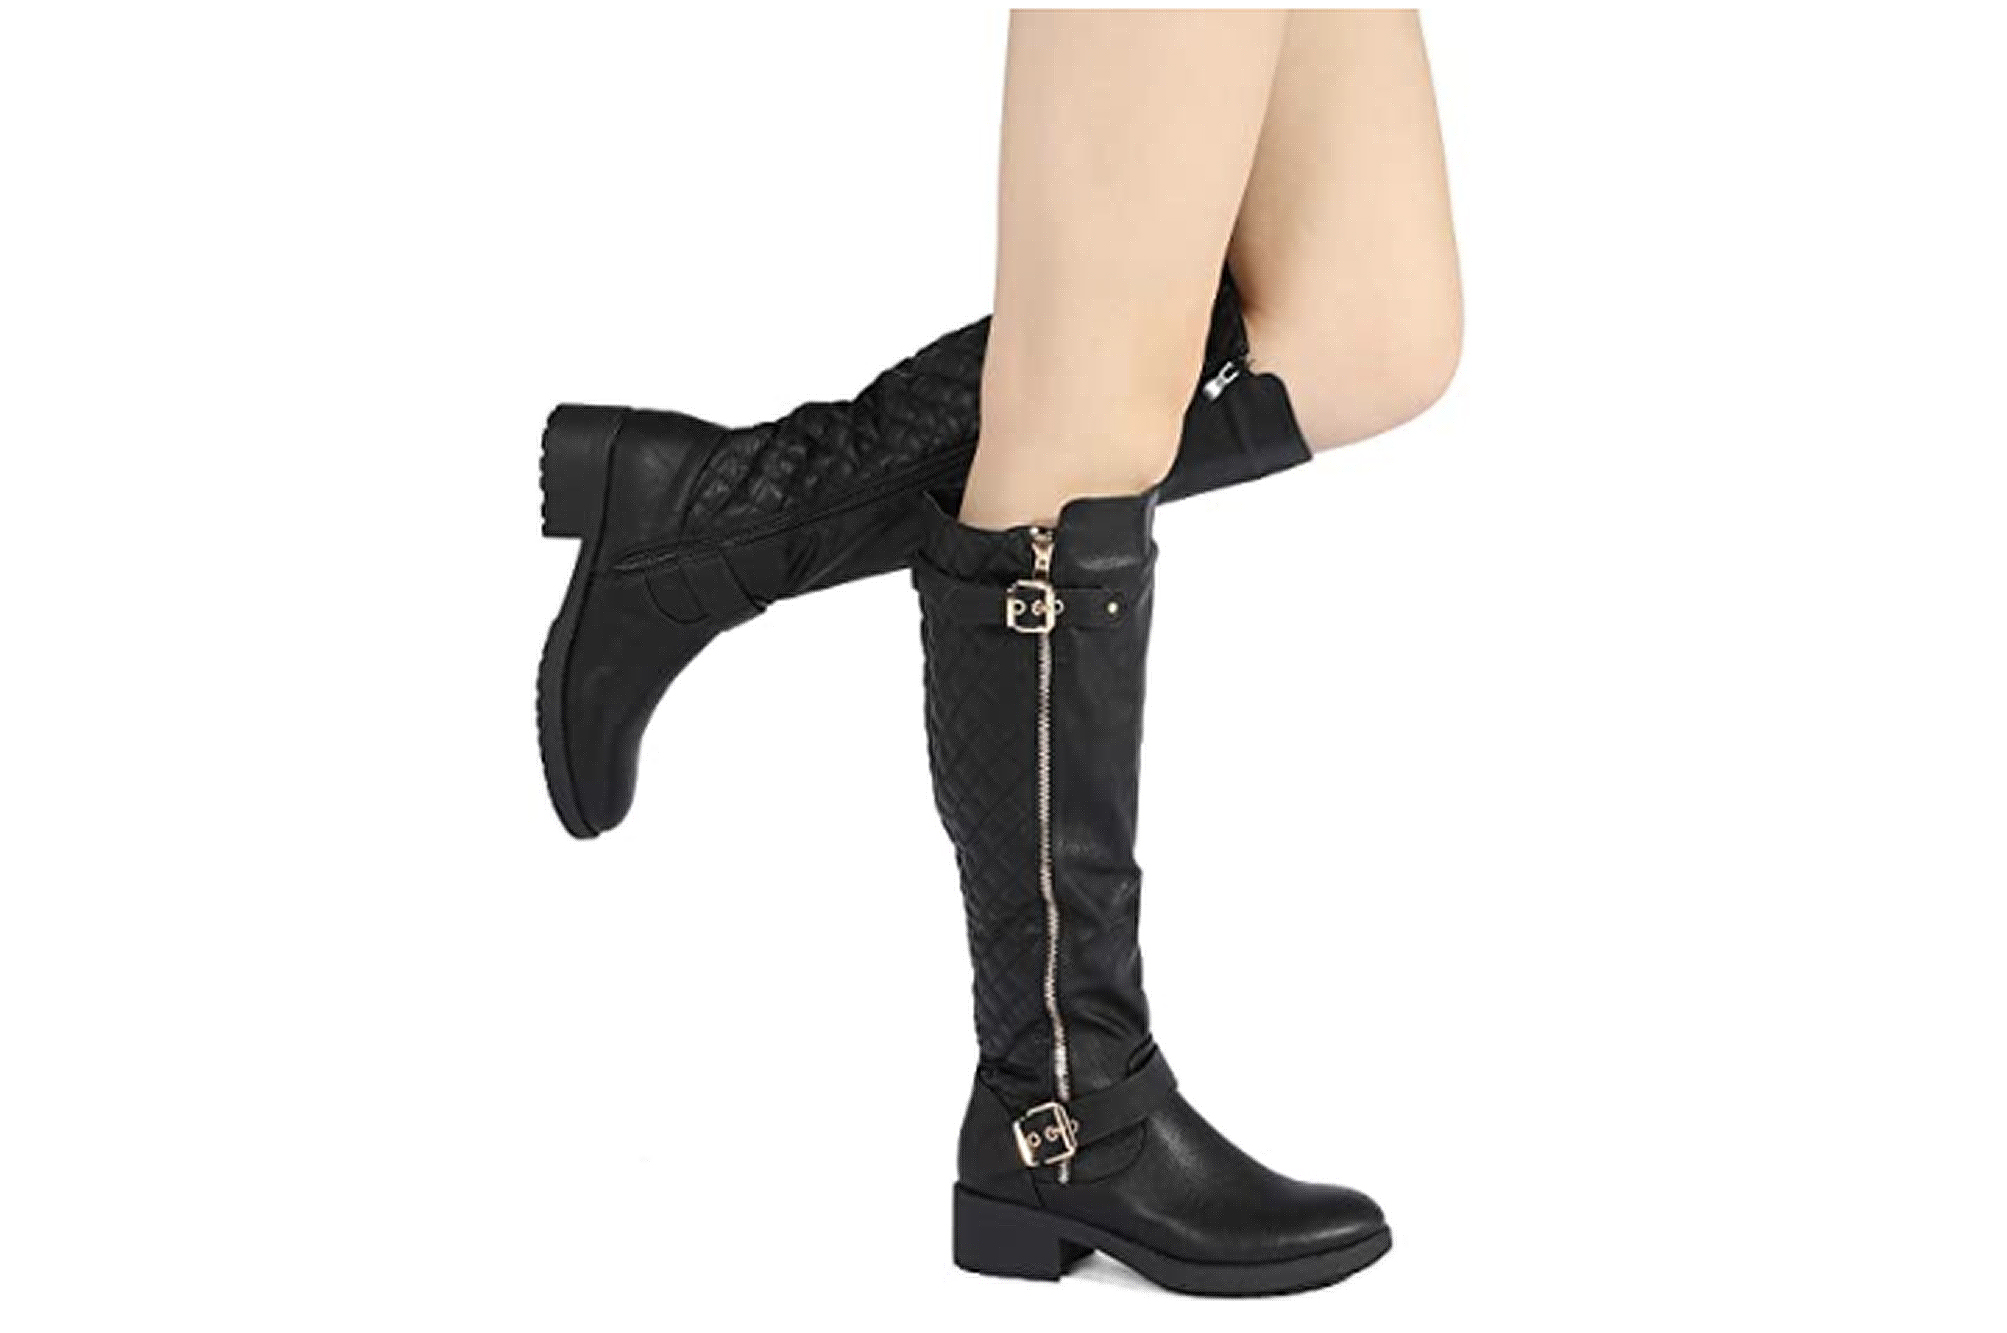 DREAM PAIRS Womens Low Heel Knee High Zipper Riding Boots Wide-Calf Available